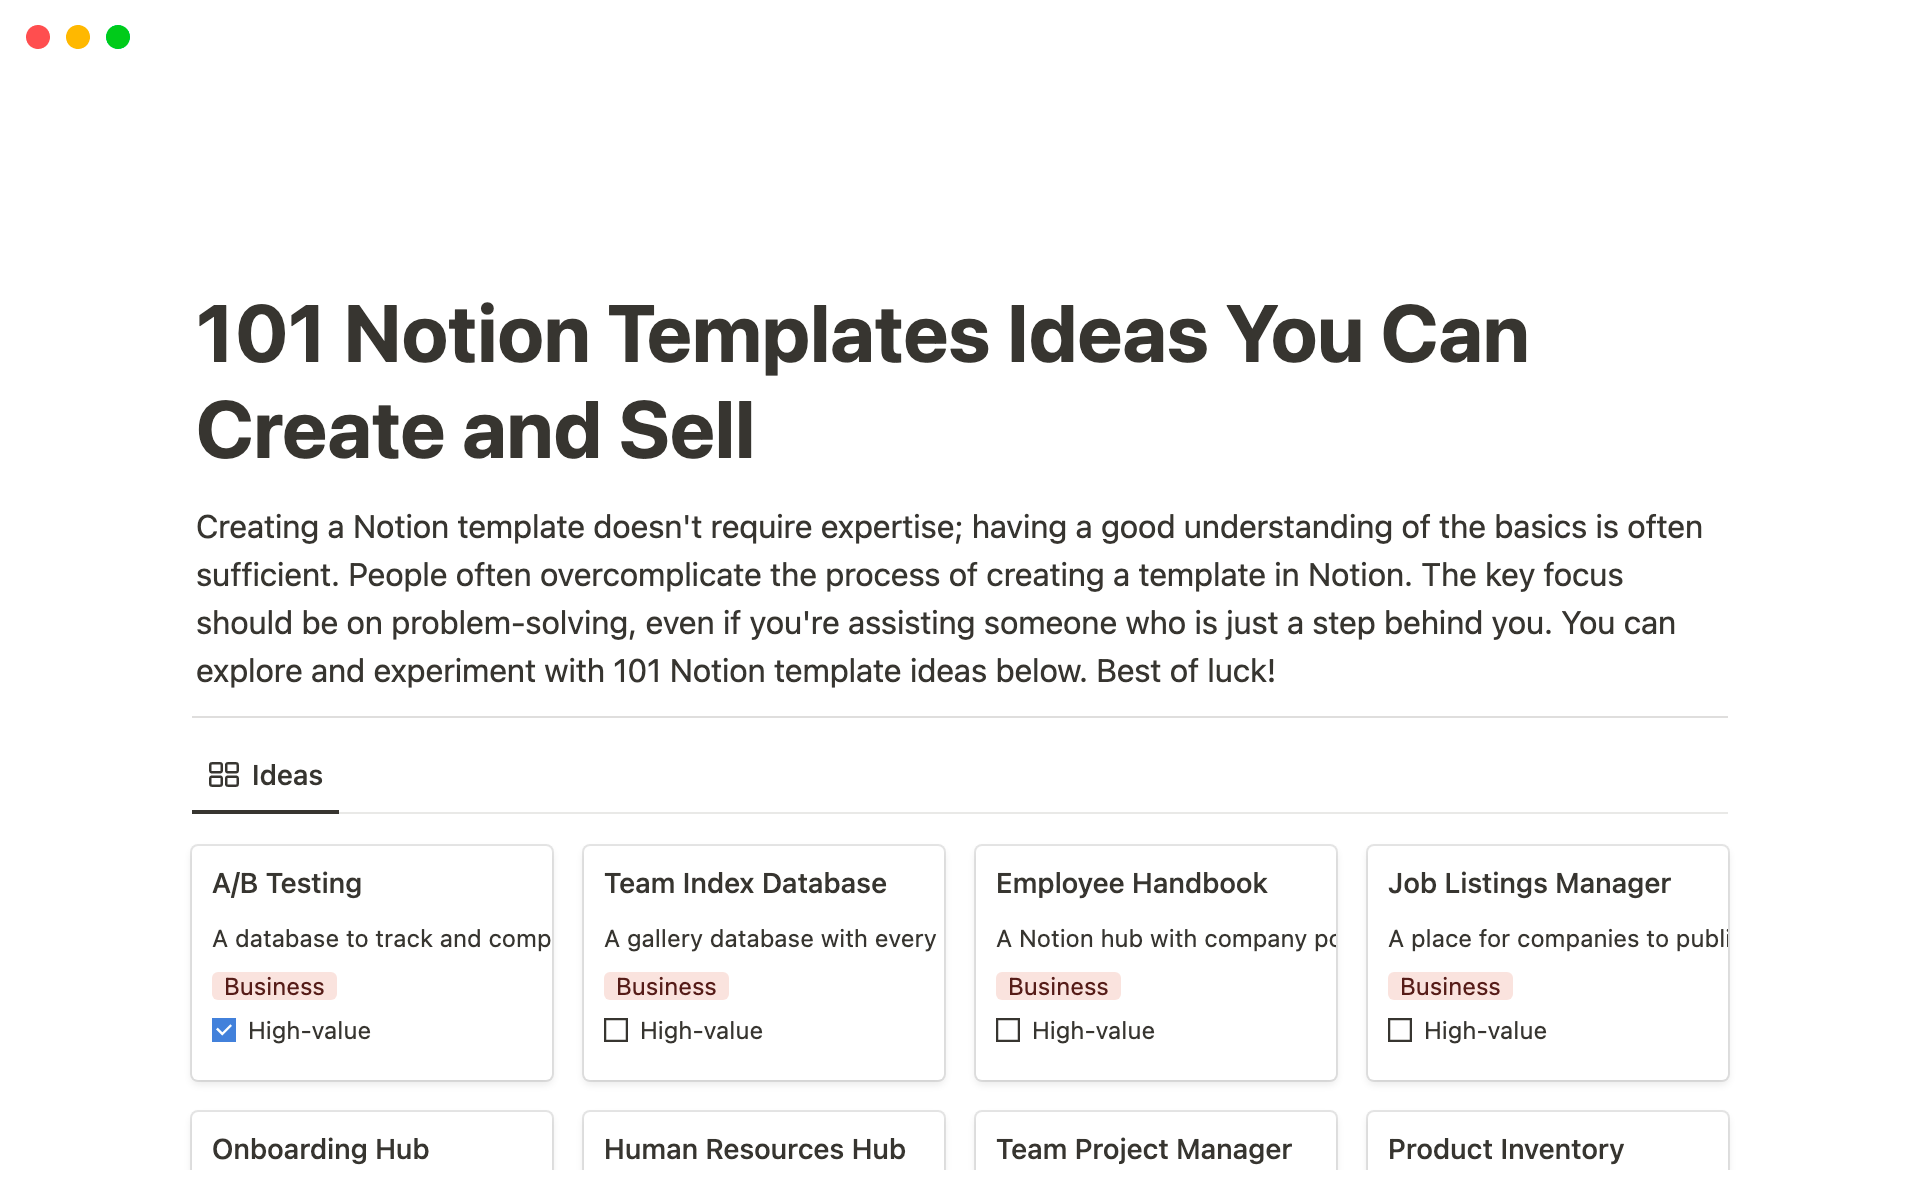 101 Notion Template Ideas You Can Create And Sell님의 템플릿 미리보기